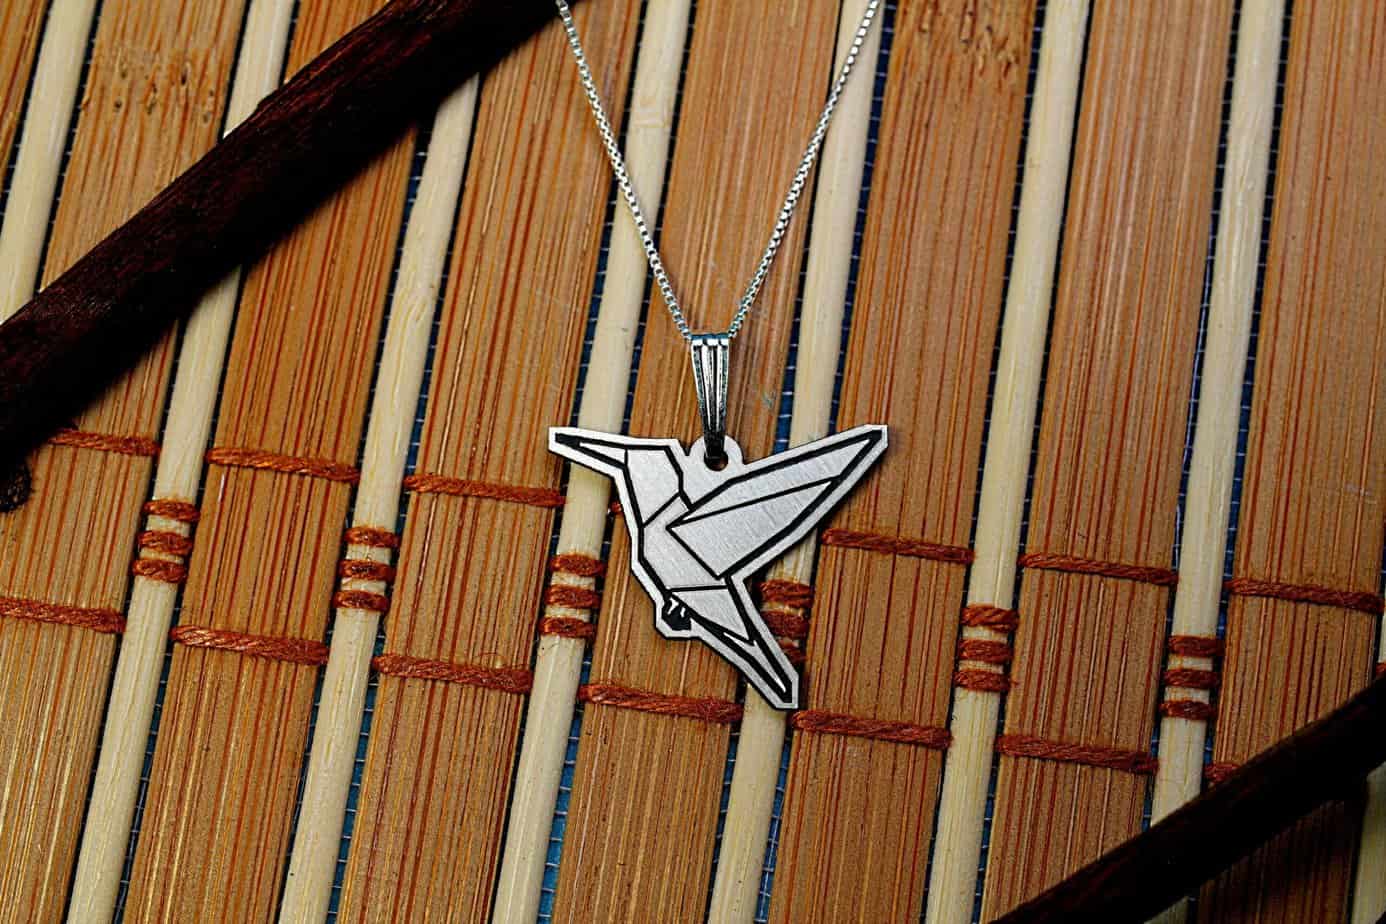 Silver Swallow Geometric Necklace, Sterling Silver Bird Jewelry, Origami Necklace, Animal Necklace, Good Luck Charm, Memorial Gift